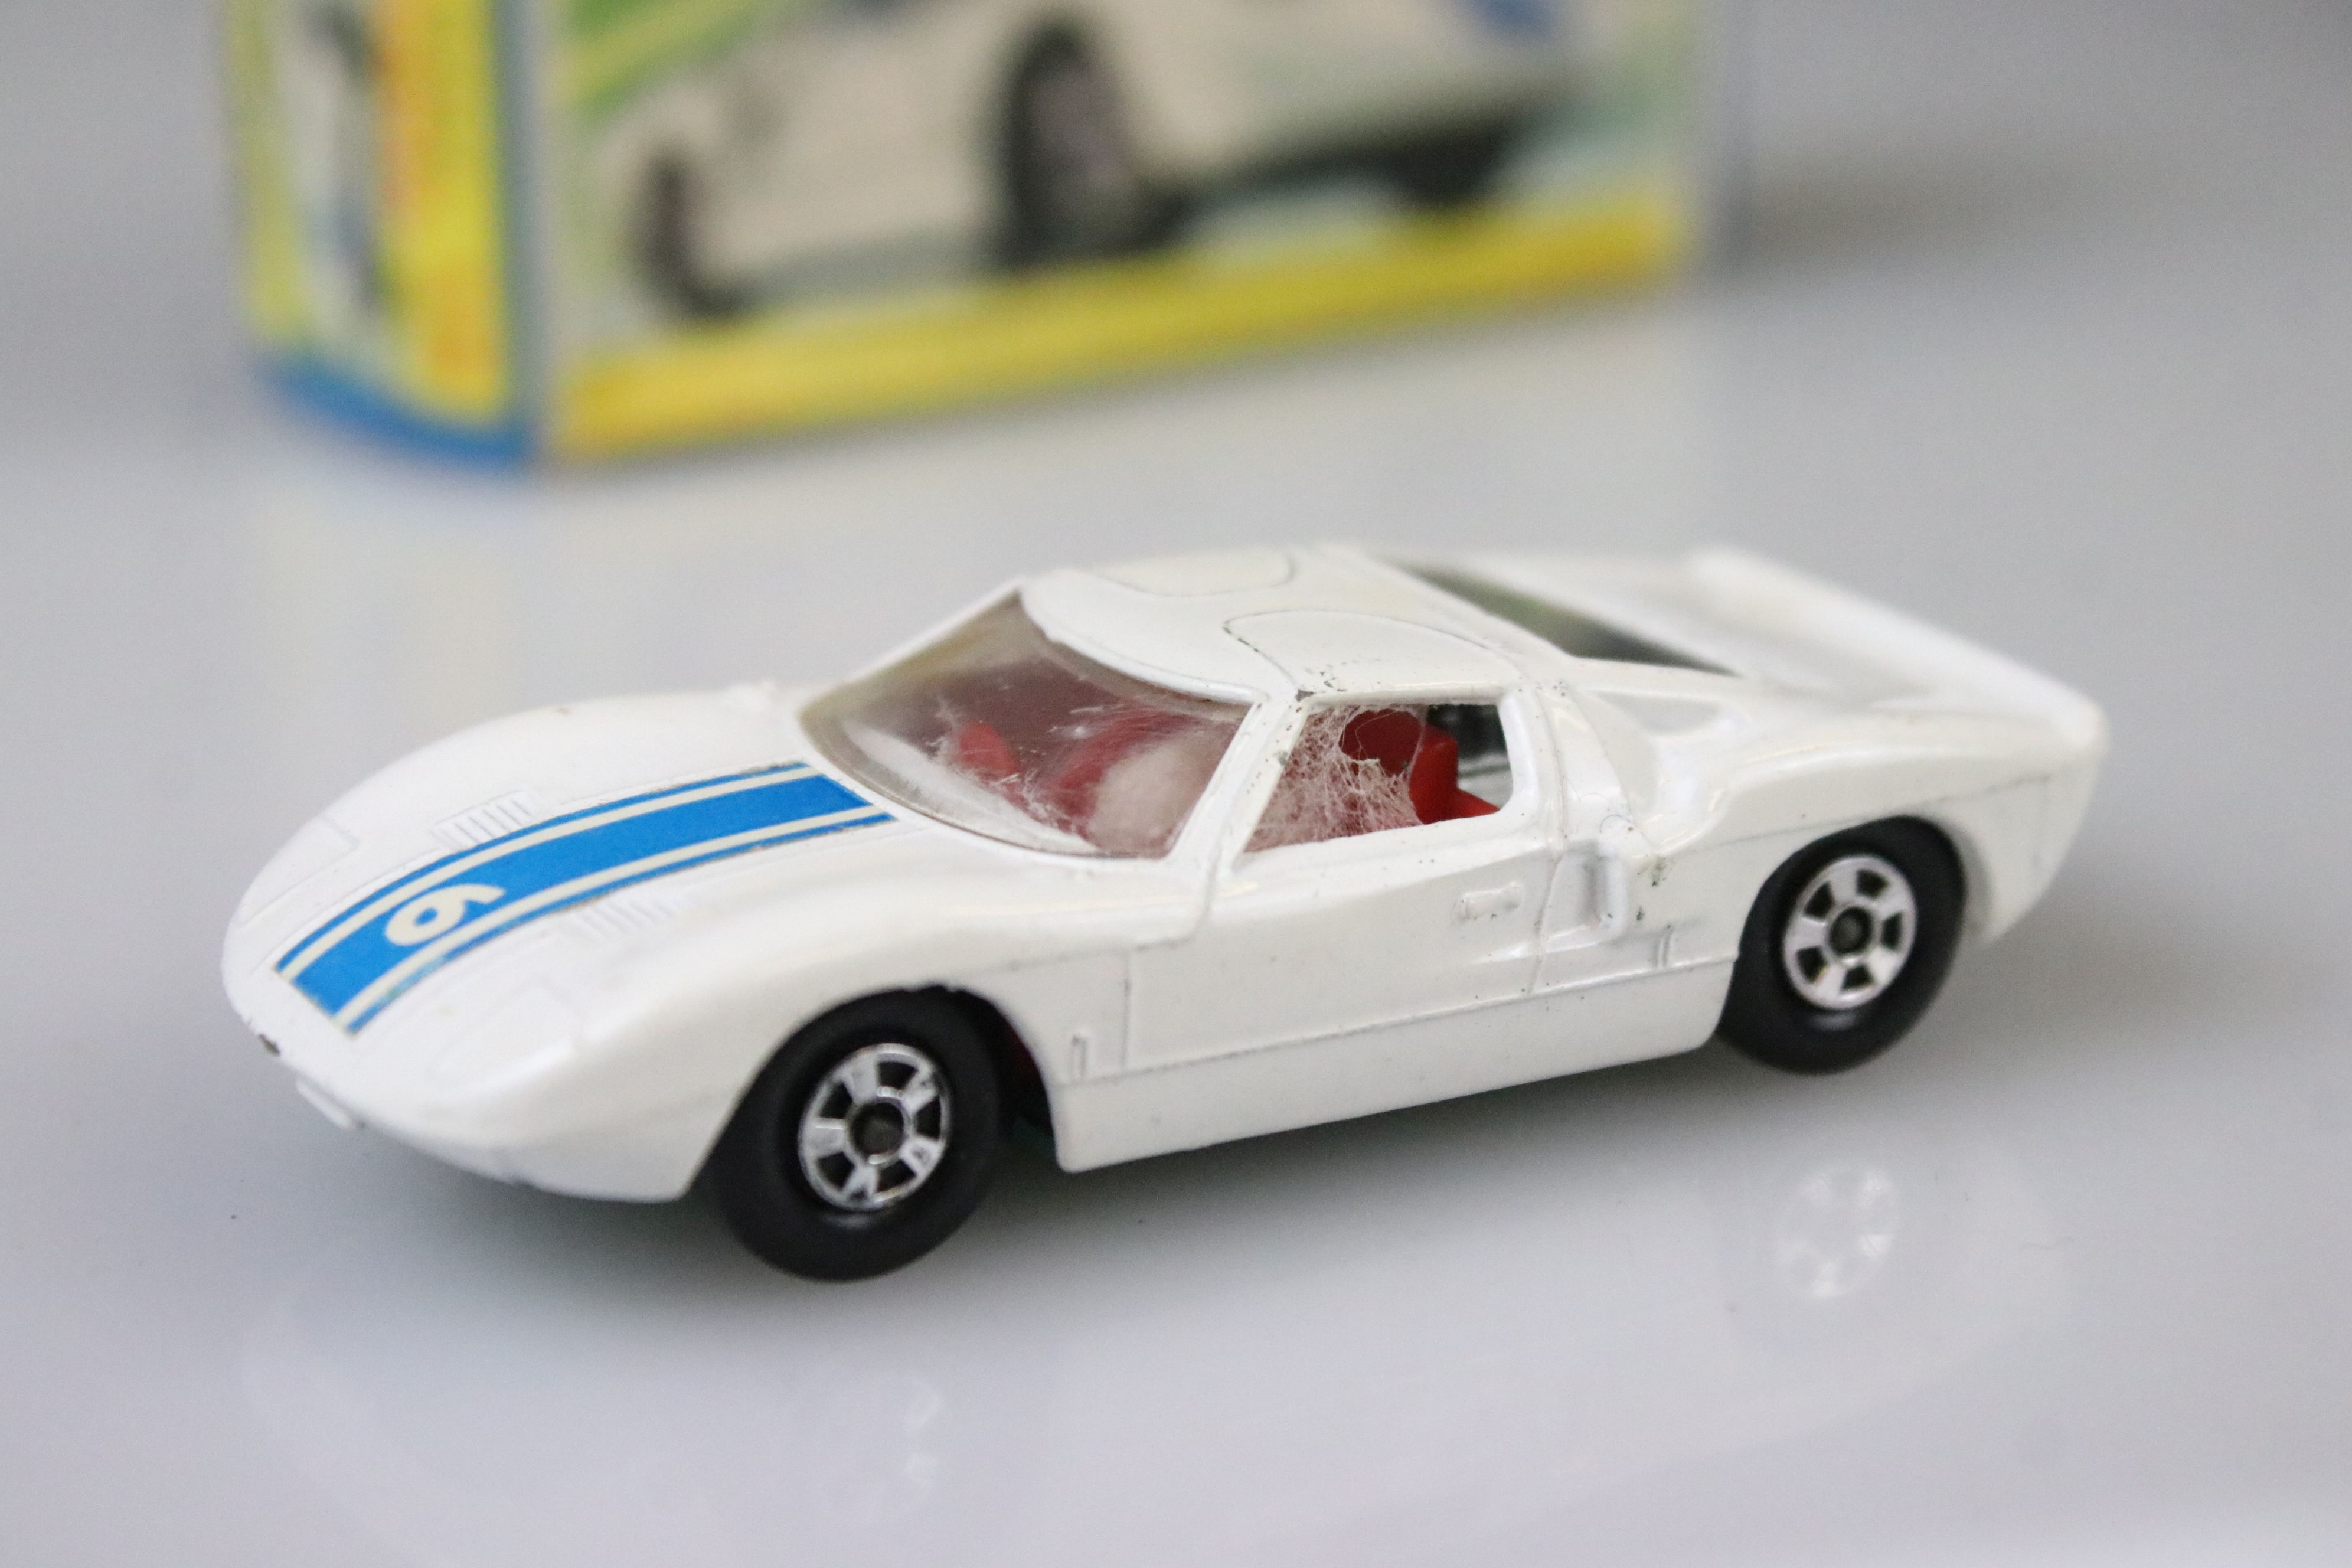 17 Boxed Matchbox Superfast diecast models to include 41 Ford GT, 29 Racing Mini, 57 Landrover - Image 48 of 53